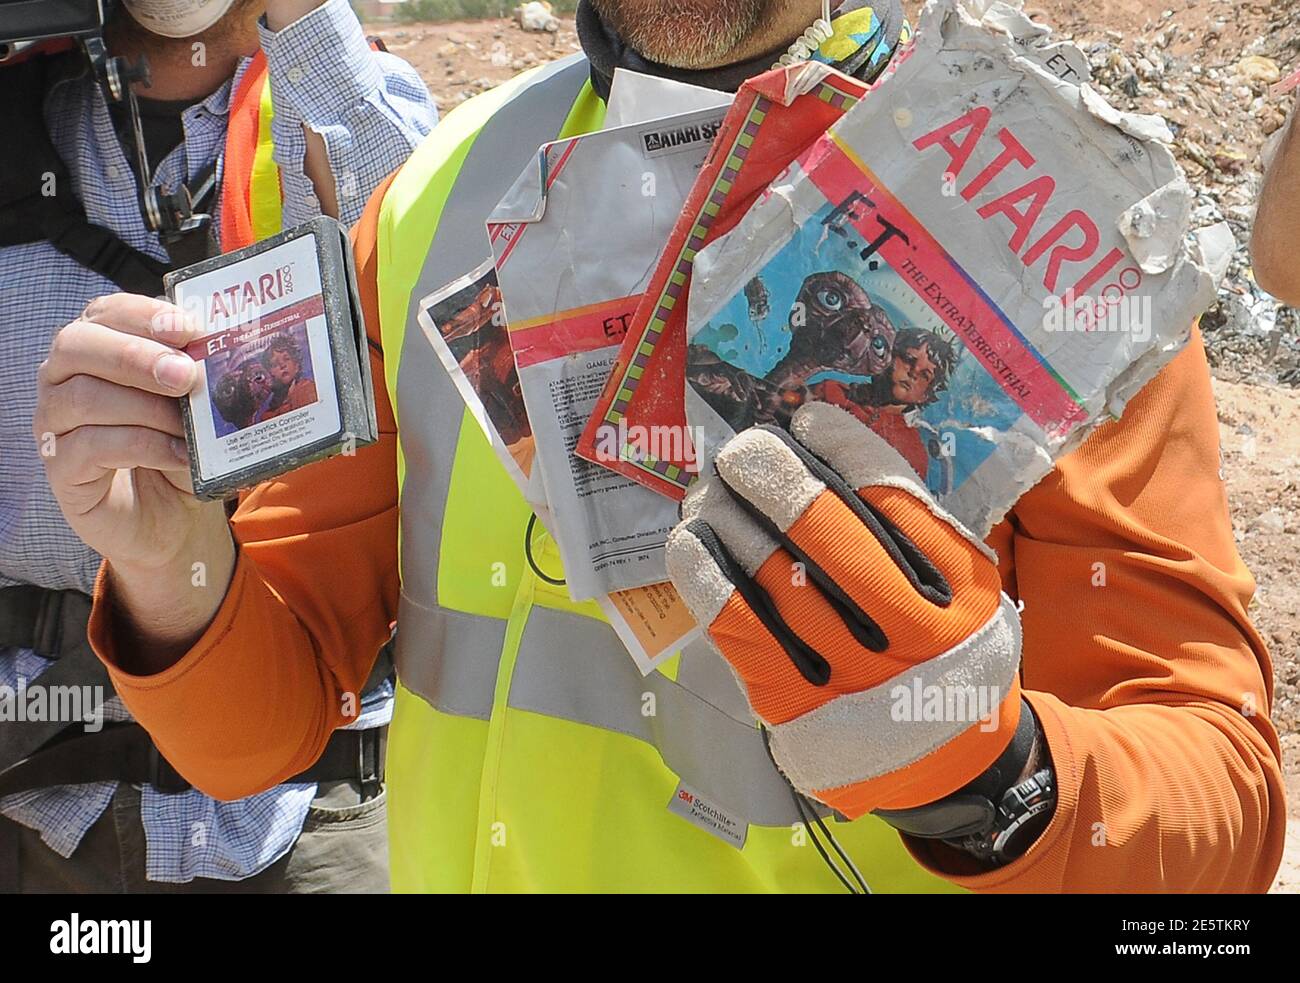 A worker shows the media the first recovered "E.T. the Extra-Terrestrial"  cartridge at the old Alamogordo landfill in Alamogordo, New Mexico, April  26, 2014. Documentary filmmakers digging in a New Mexico landfill